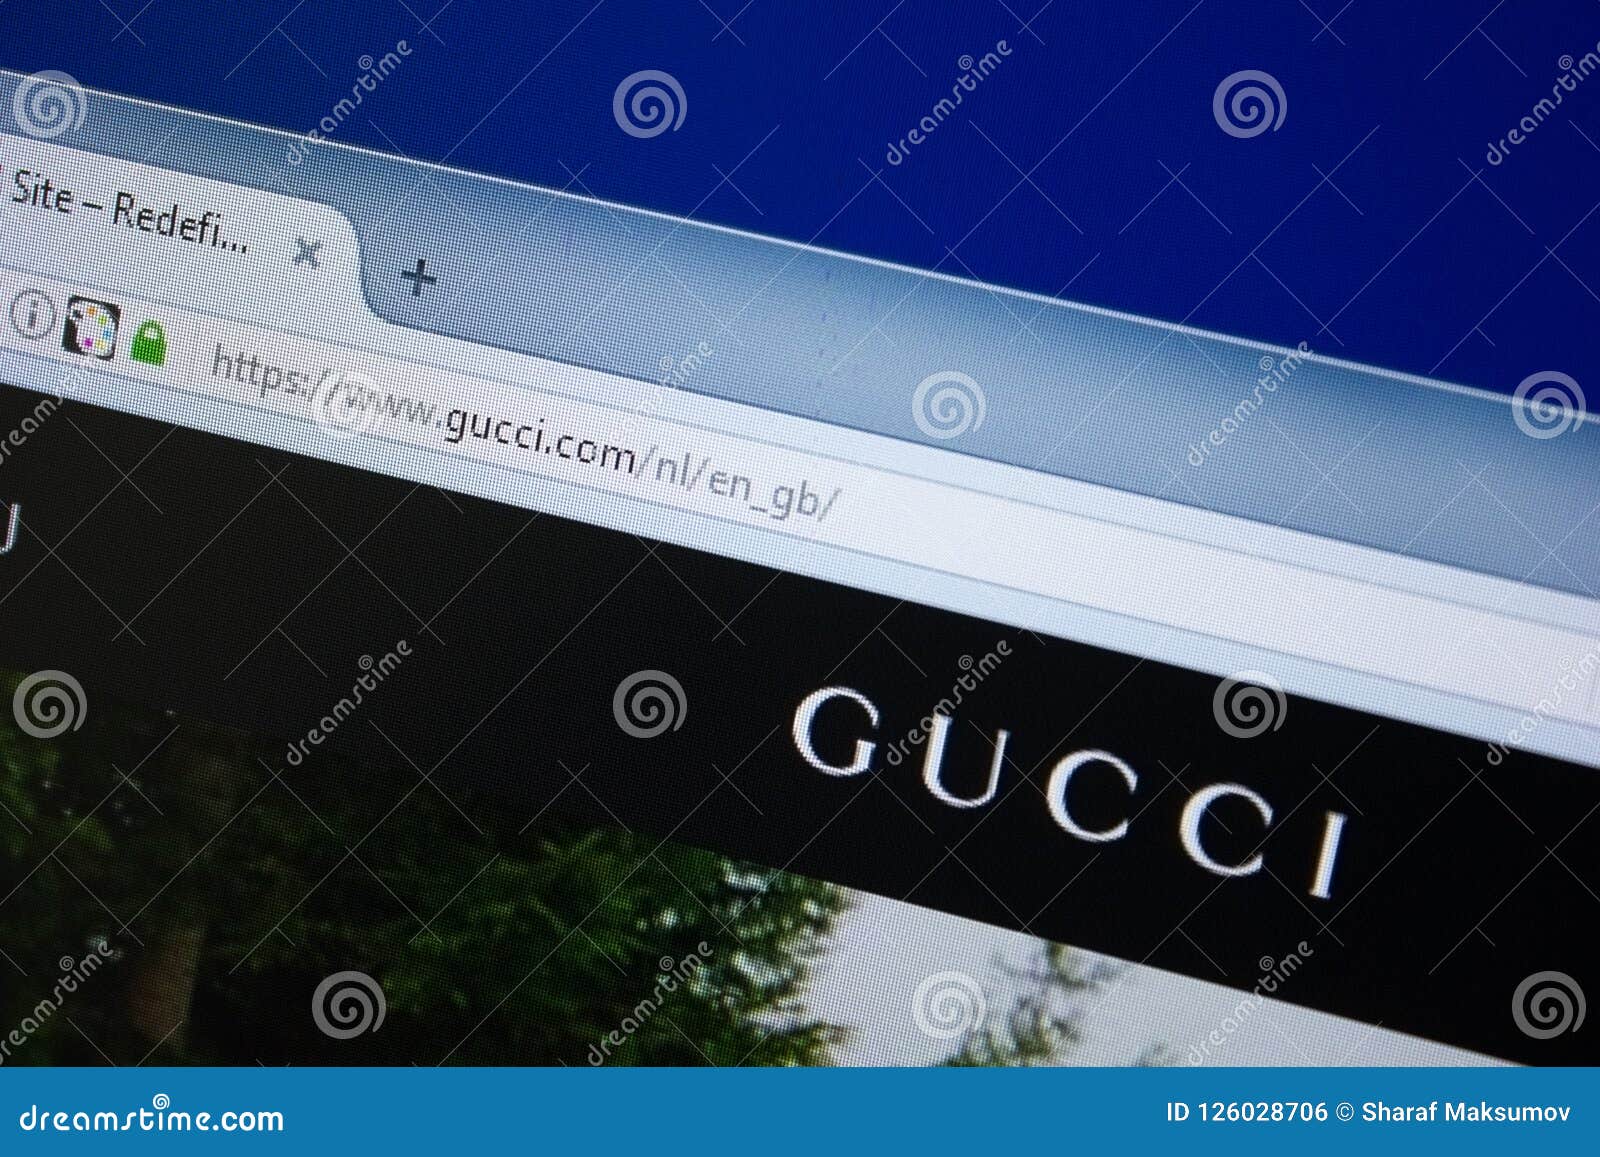 svindler morder vold Ryazan, Russia - September 09, 2018: Homepage of Gucci Website on the  Display of PC, Url - Gucci.com Editorial Photo - Image of http, front:  126028706